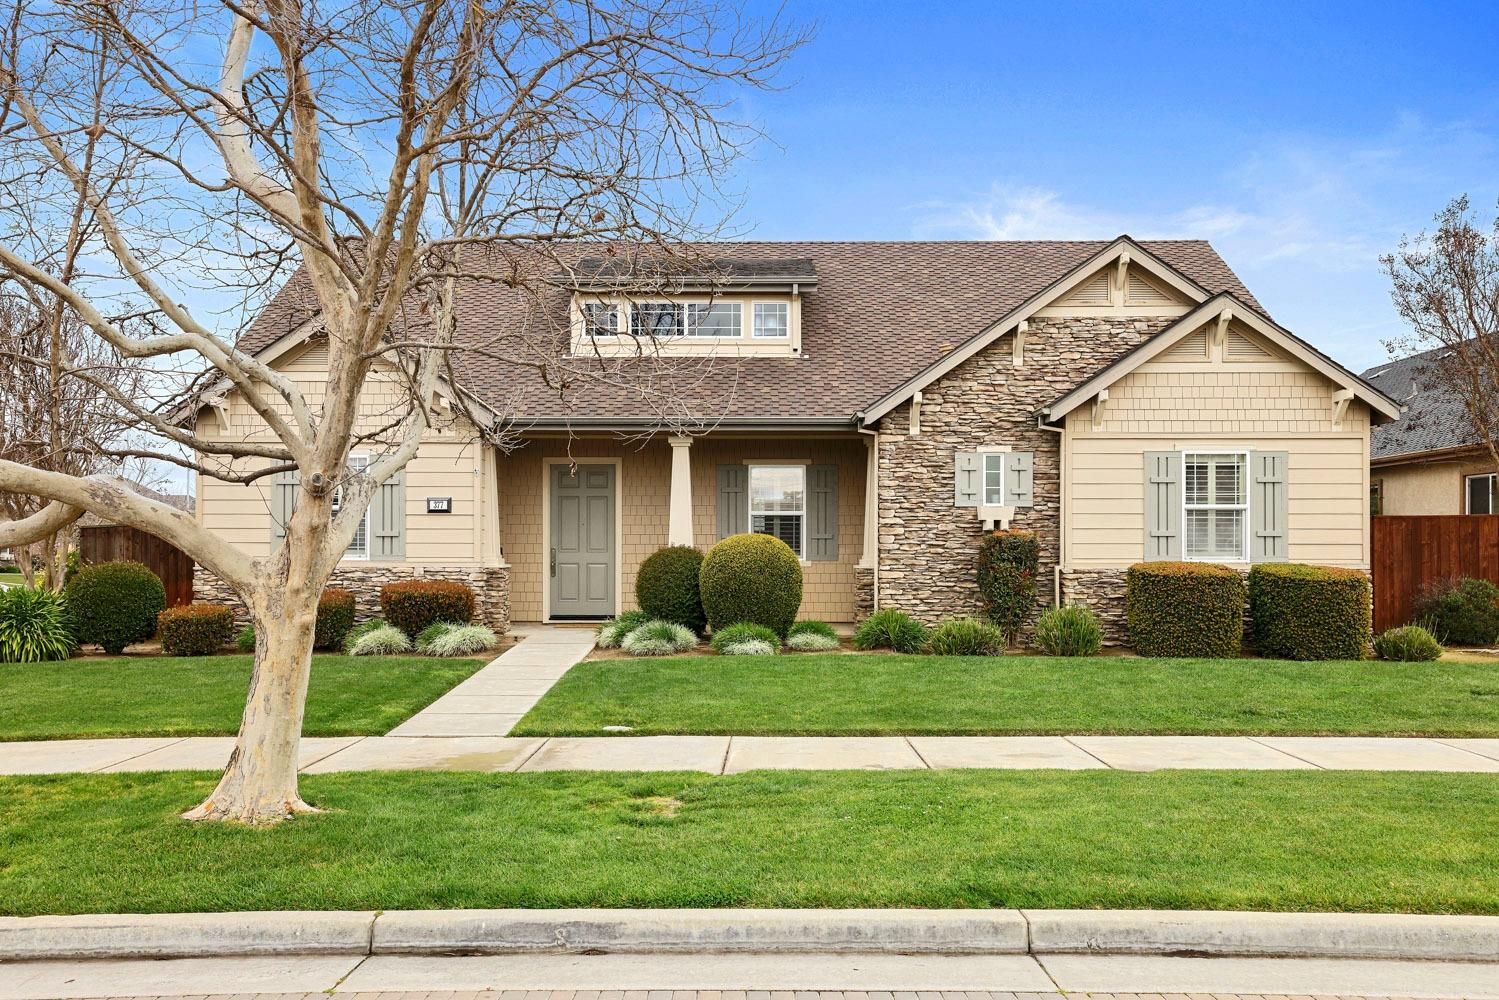 Photo of 377 Travertine Dr in Ripon, CA